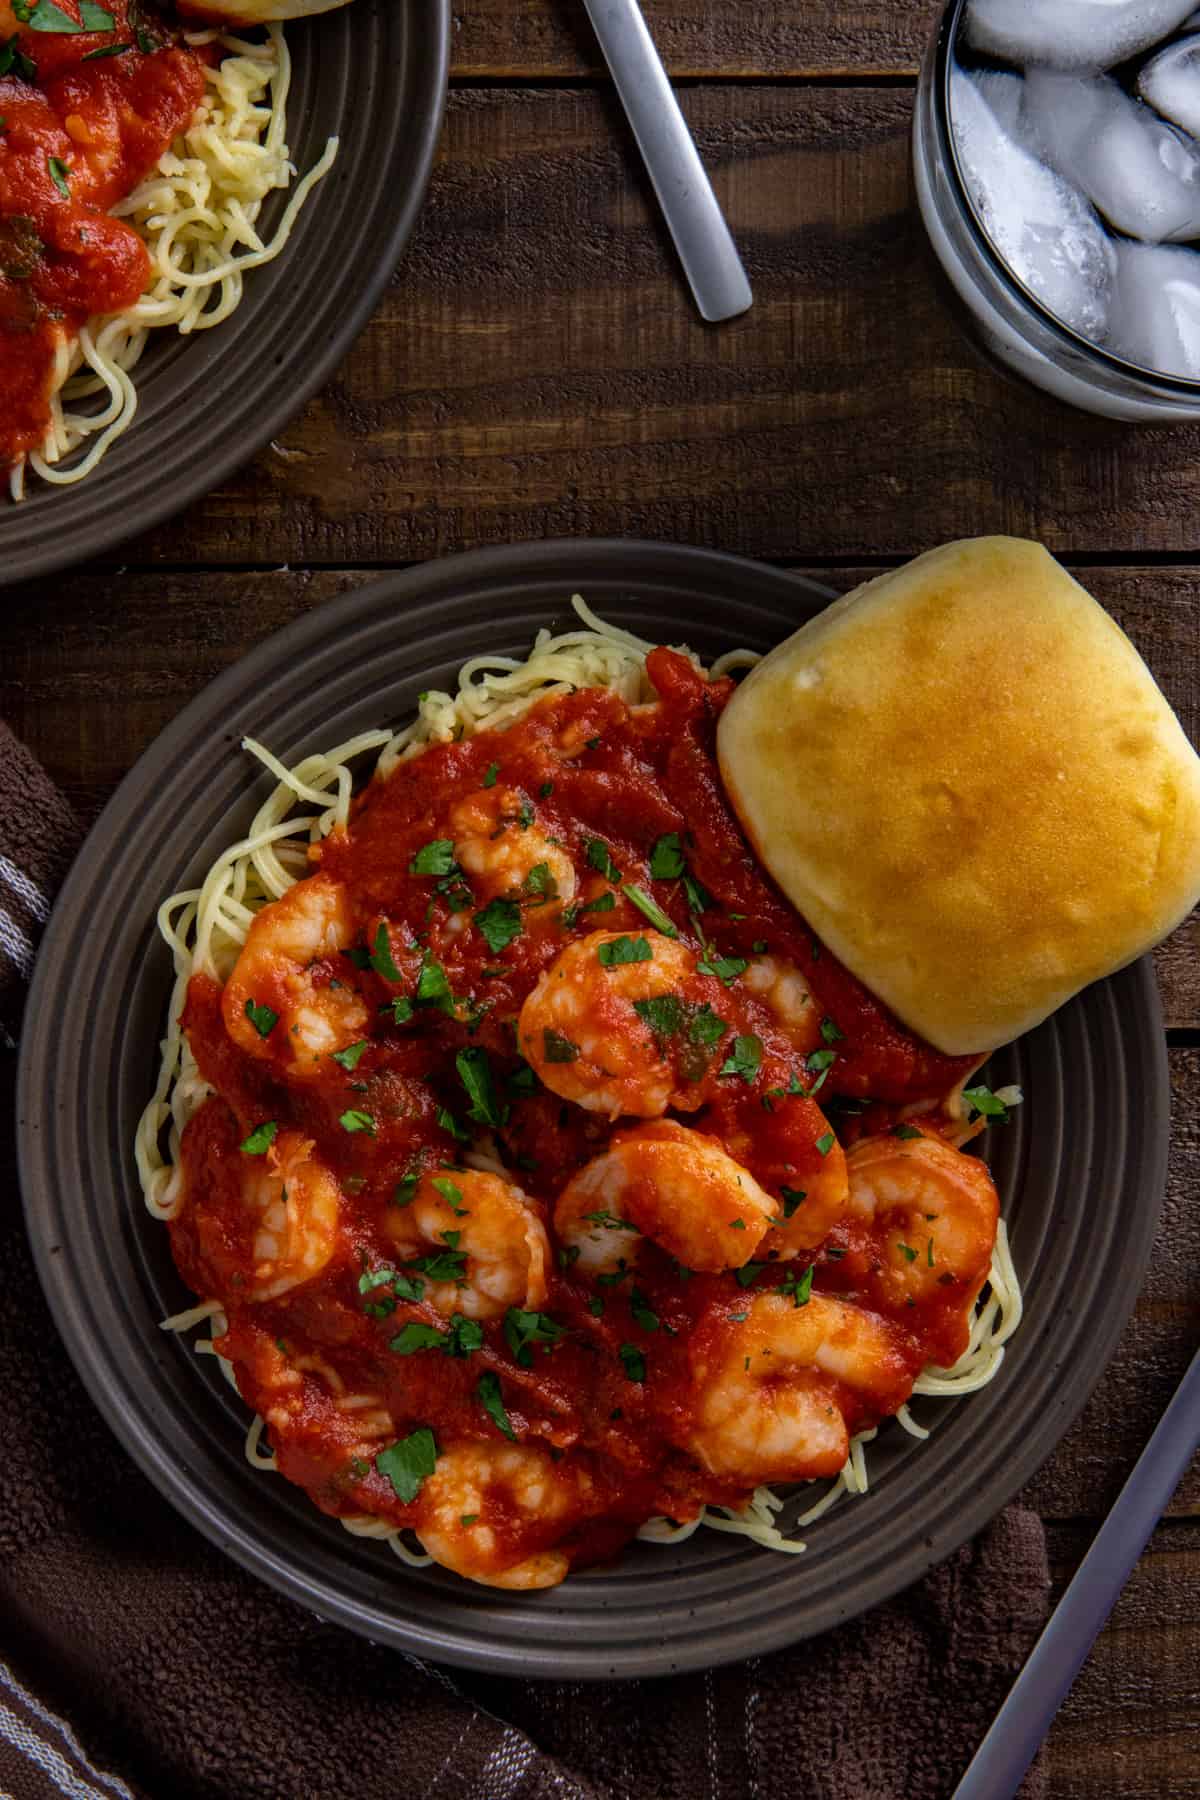 Shrimp spaghetti on a brown plate with a dinner roll on the side.